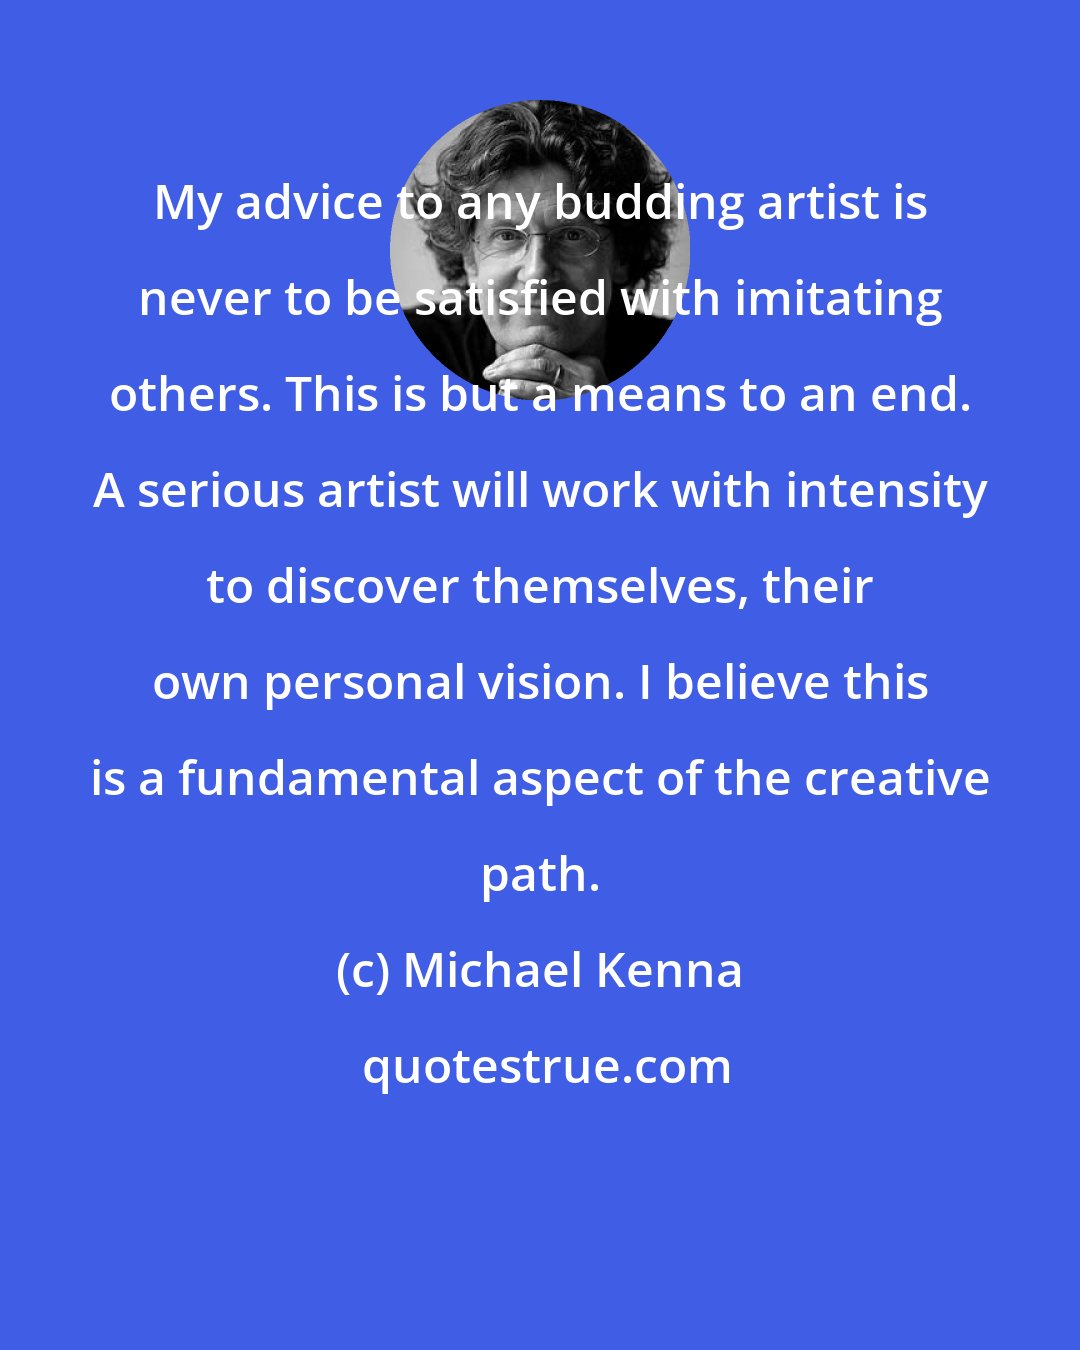 Michael Kenna: My advice to any budding artist is never to be satisfied with imitating others. This is but a means to an end. A serious artist will work with intensity to discover themselves, their own personal vision. I believe this is a fundamental aspect of the creative path.